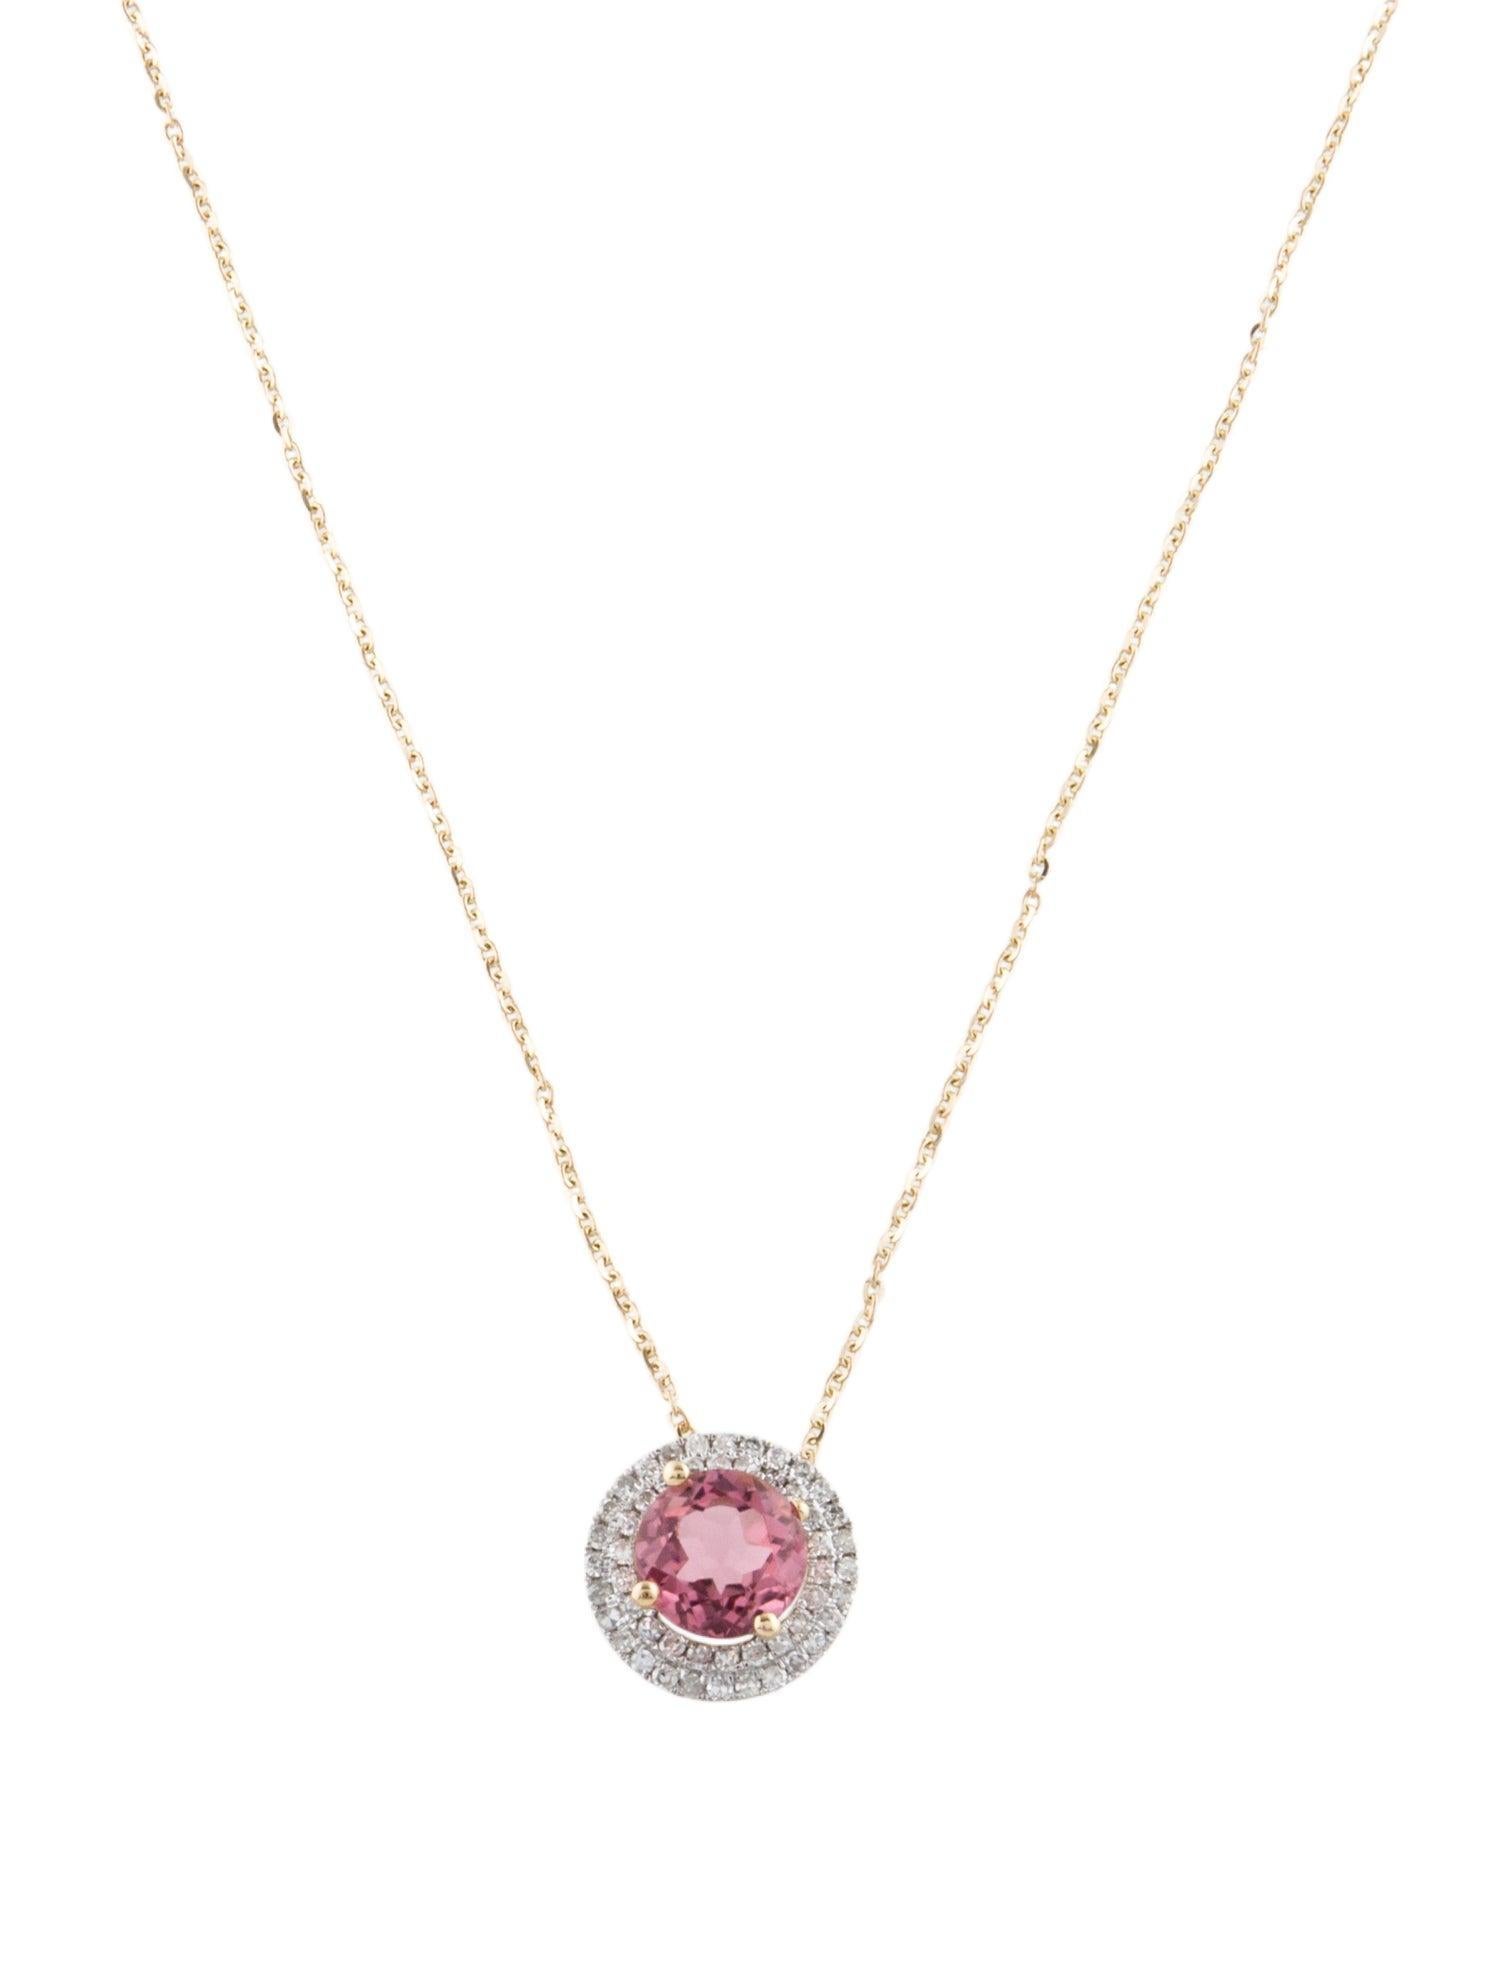 14K 1.44ctw Tourmaline & Diamond Pendant: Elegant Statement Necklace, Luxury In New Condition For Sale In Holtsville, NY